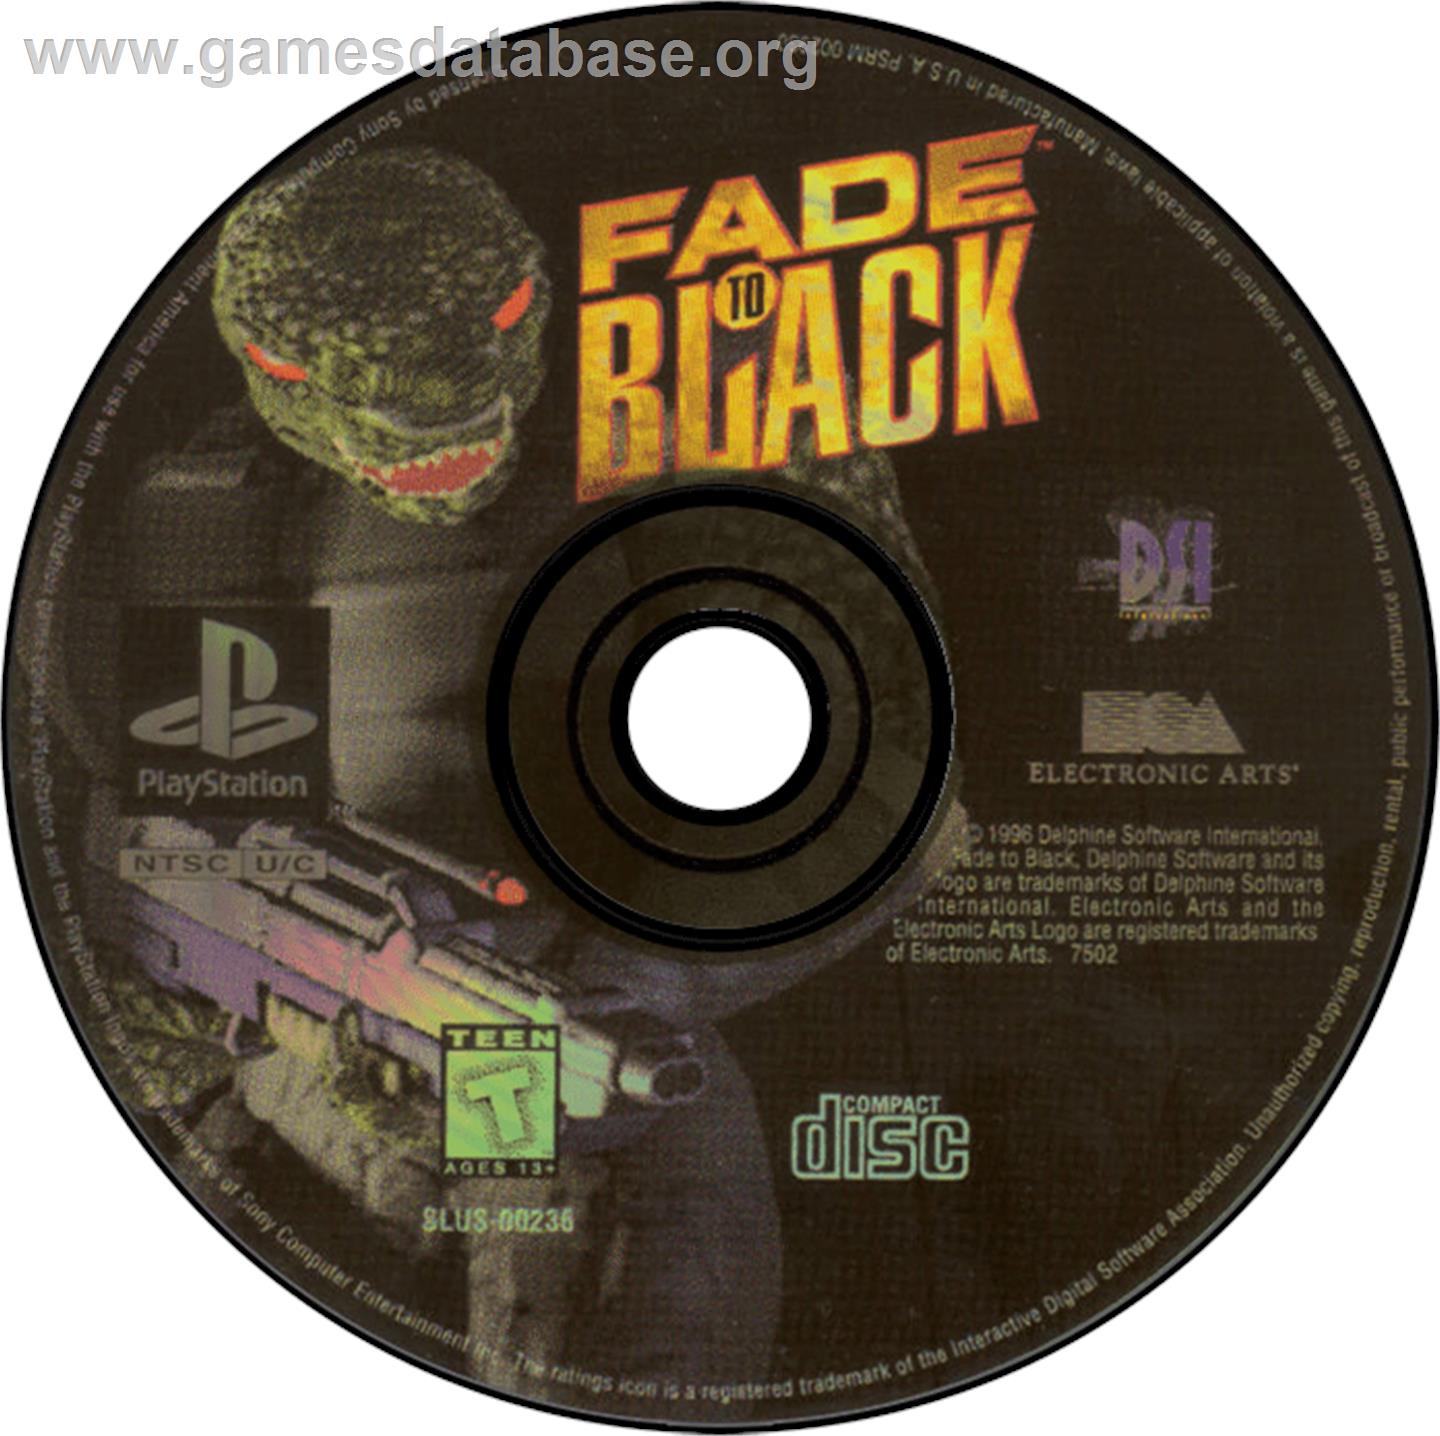 Fade to Black - Sony Playstation - Artwork - Disc